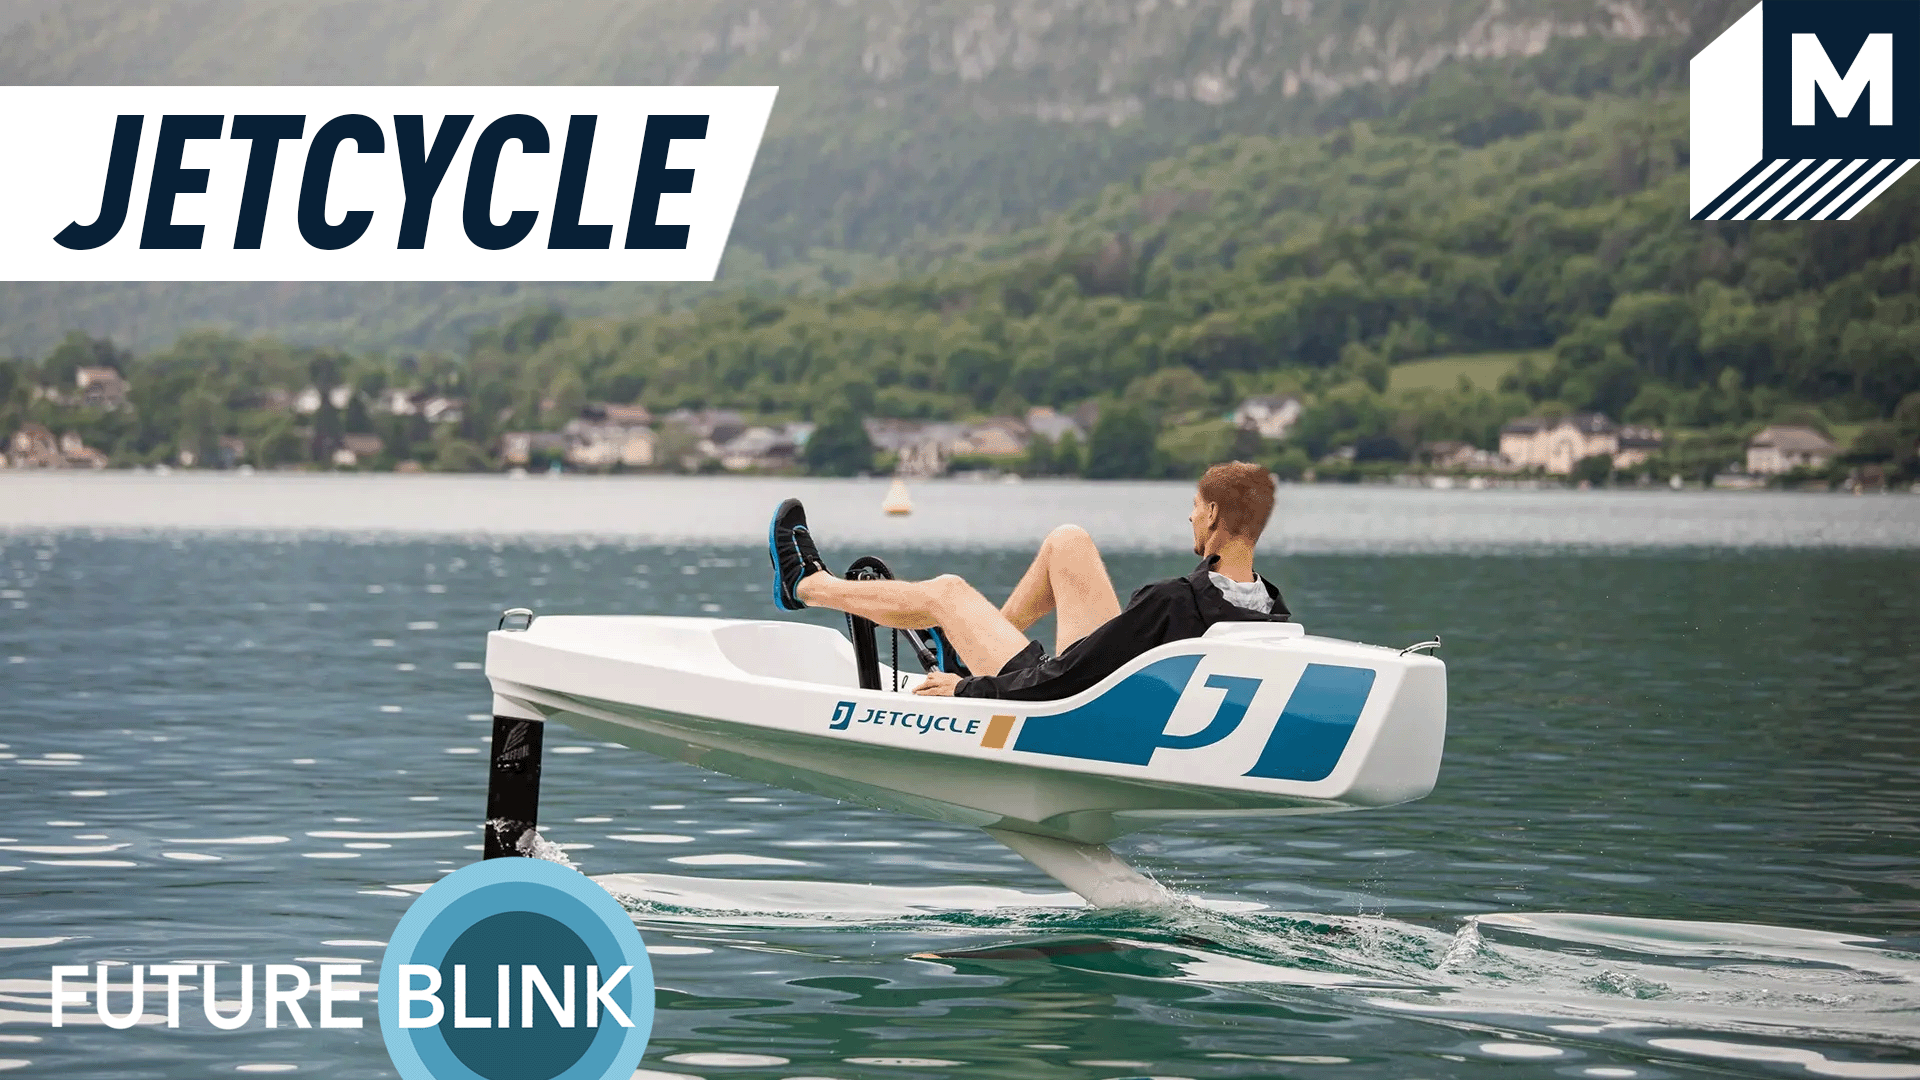 Lean back and pedal this ultra-fast Jetcycle hydrofoil boat